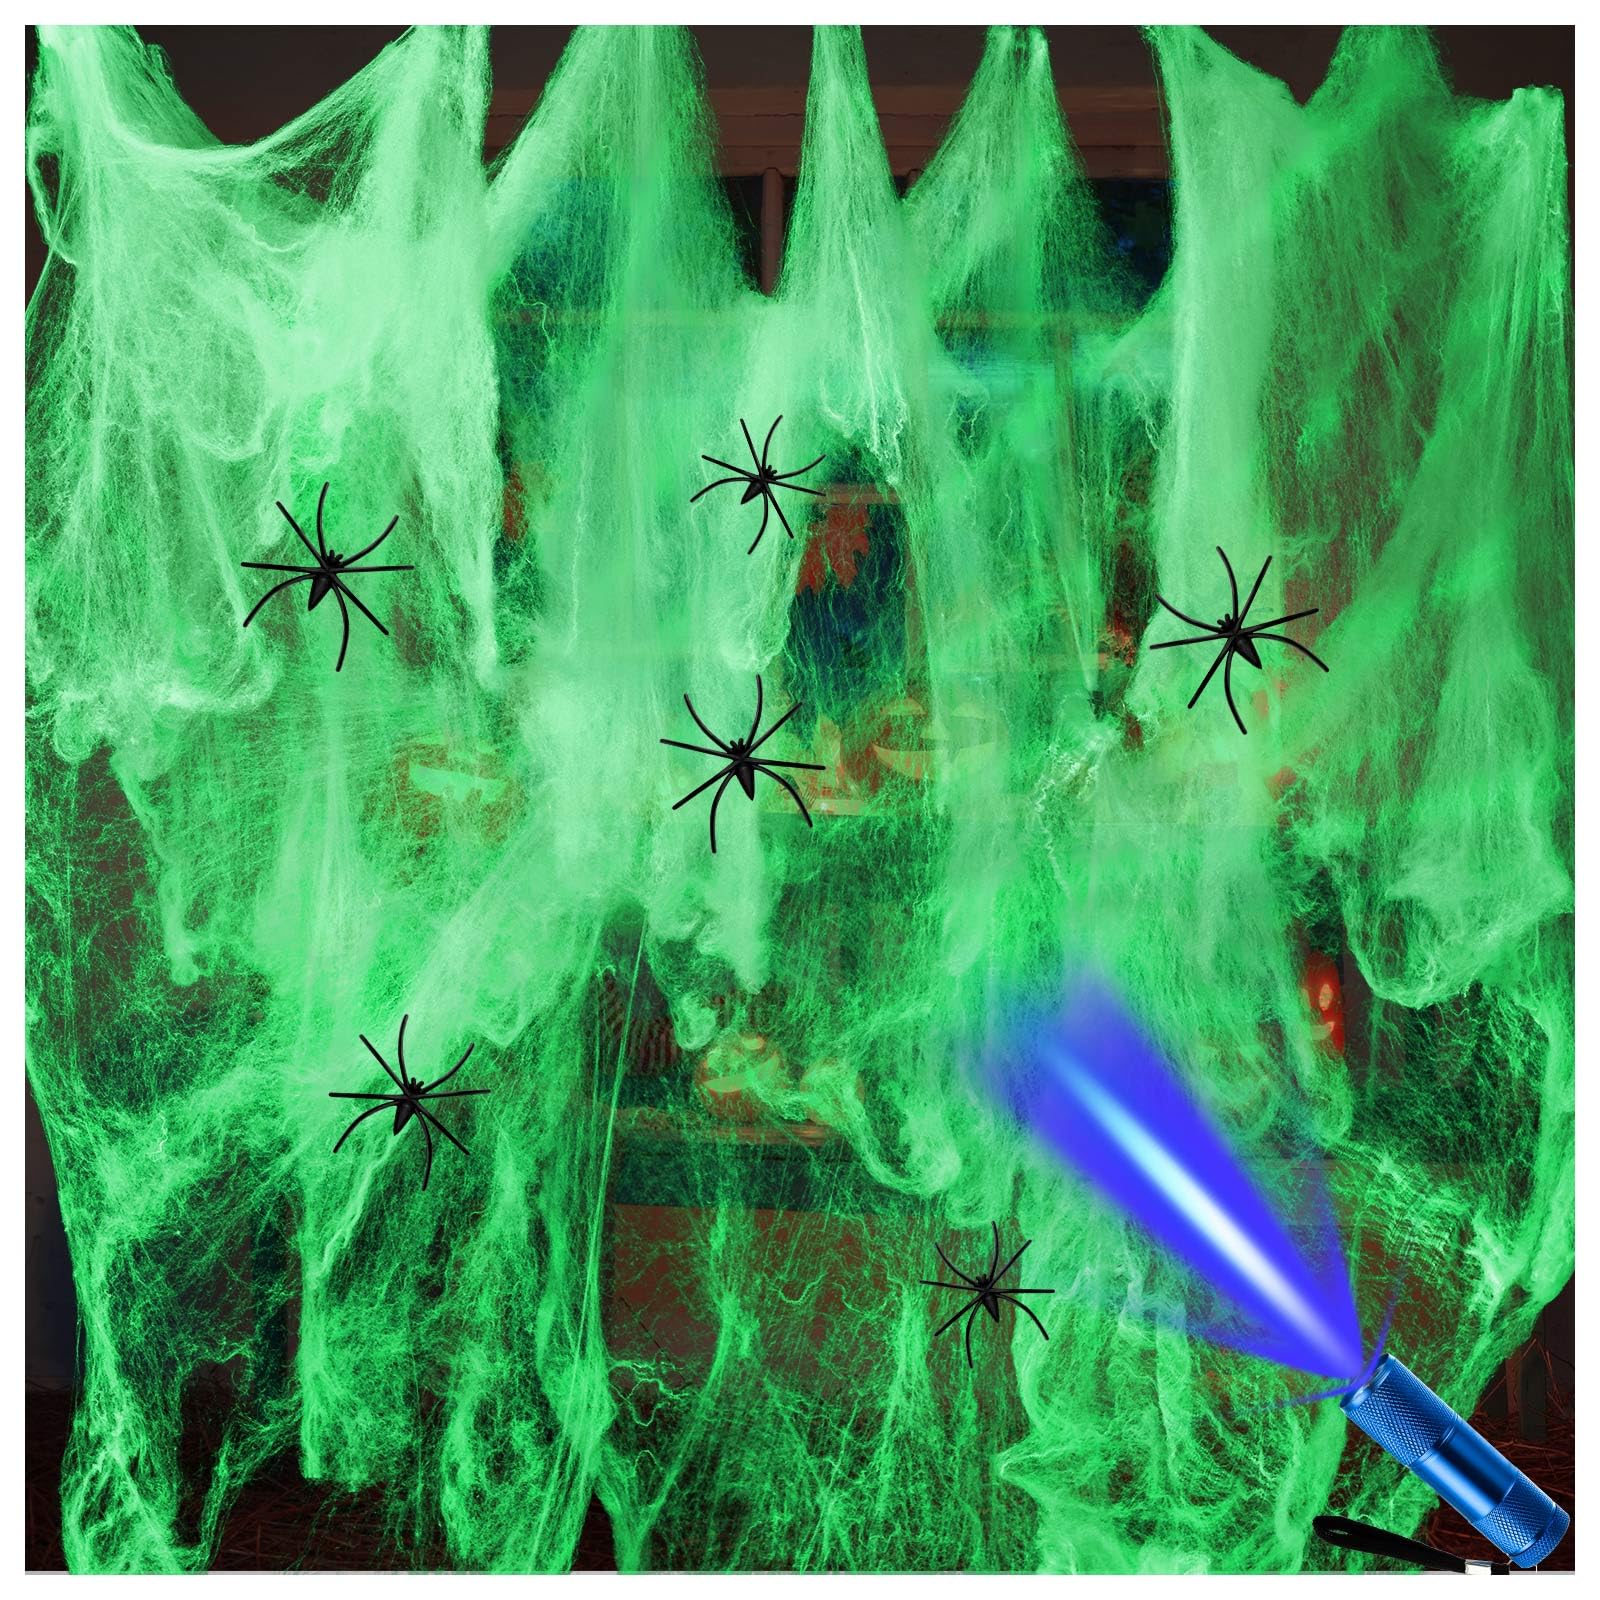 Glow in The Dark Spider Web, Spider Web for Halloween Decorations, DIY White Mega Cobwebs with 6 Fake Spiders, White Stretch Spider Web Decoration for Creepy Scene Props Indoor